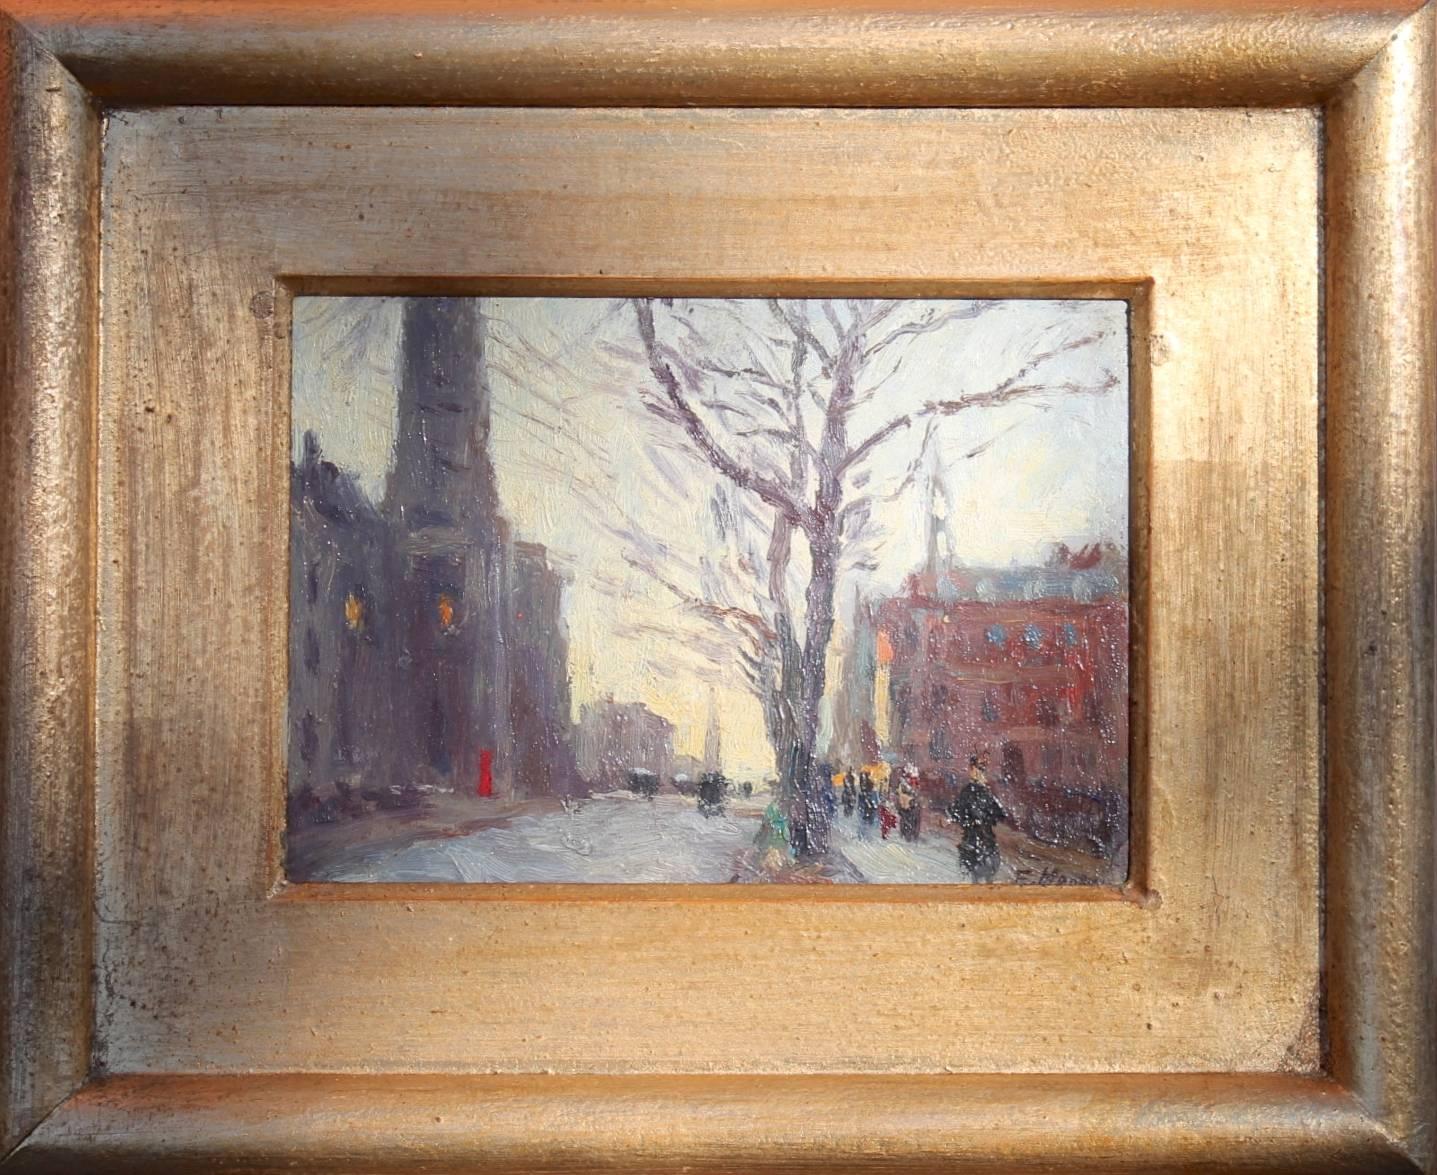 Street Scene at Evening - Painting by Unknown